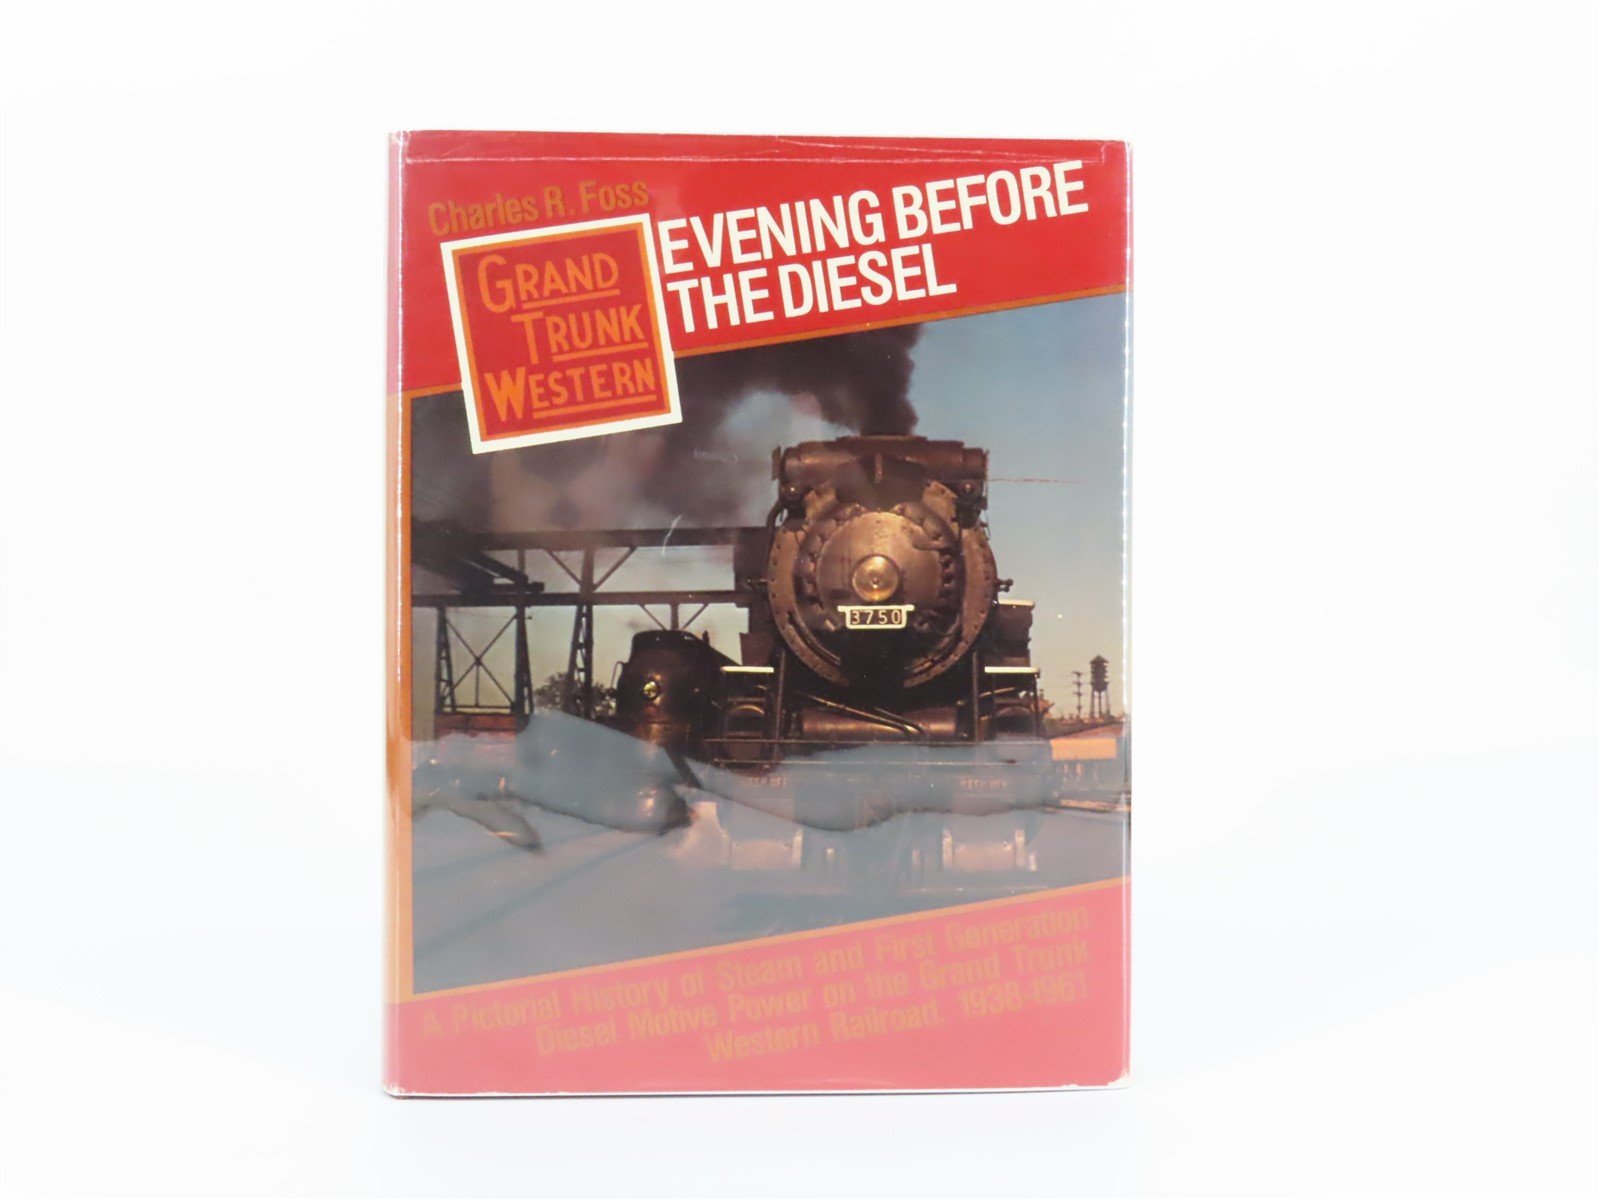 Grand Trunk Western: Evening Before The Diesel by Charles R. Foss ©1980 HC Book